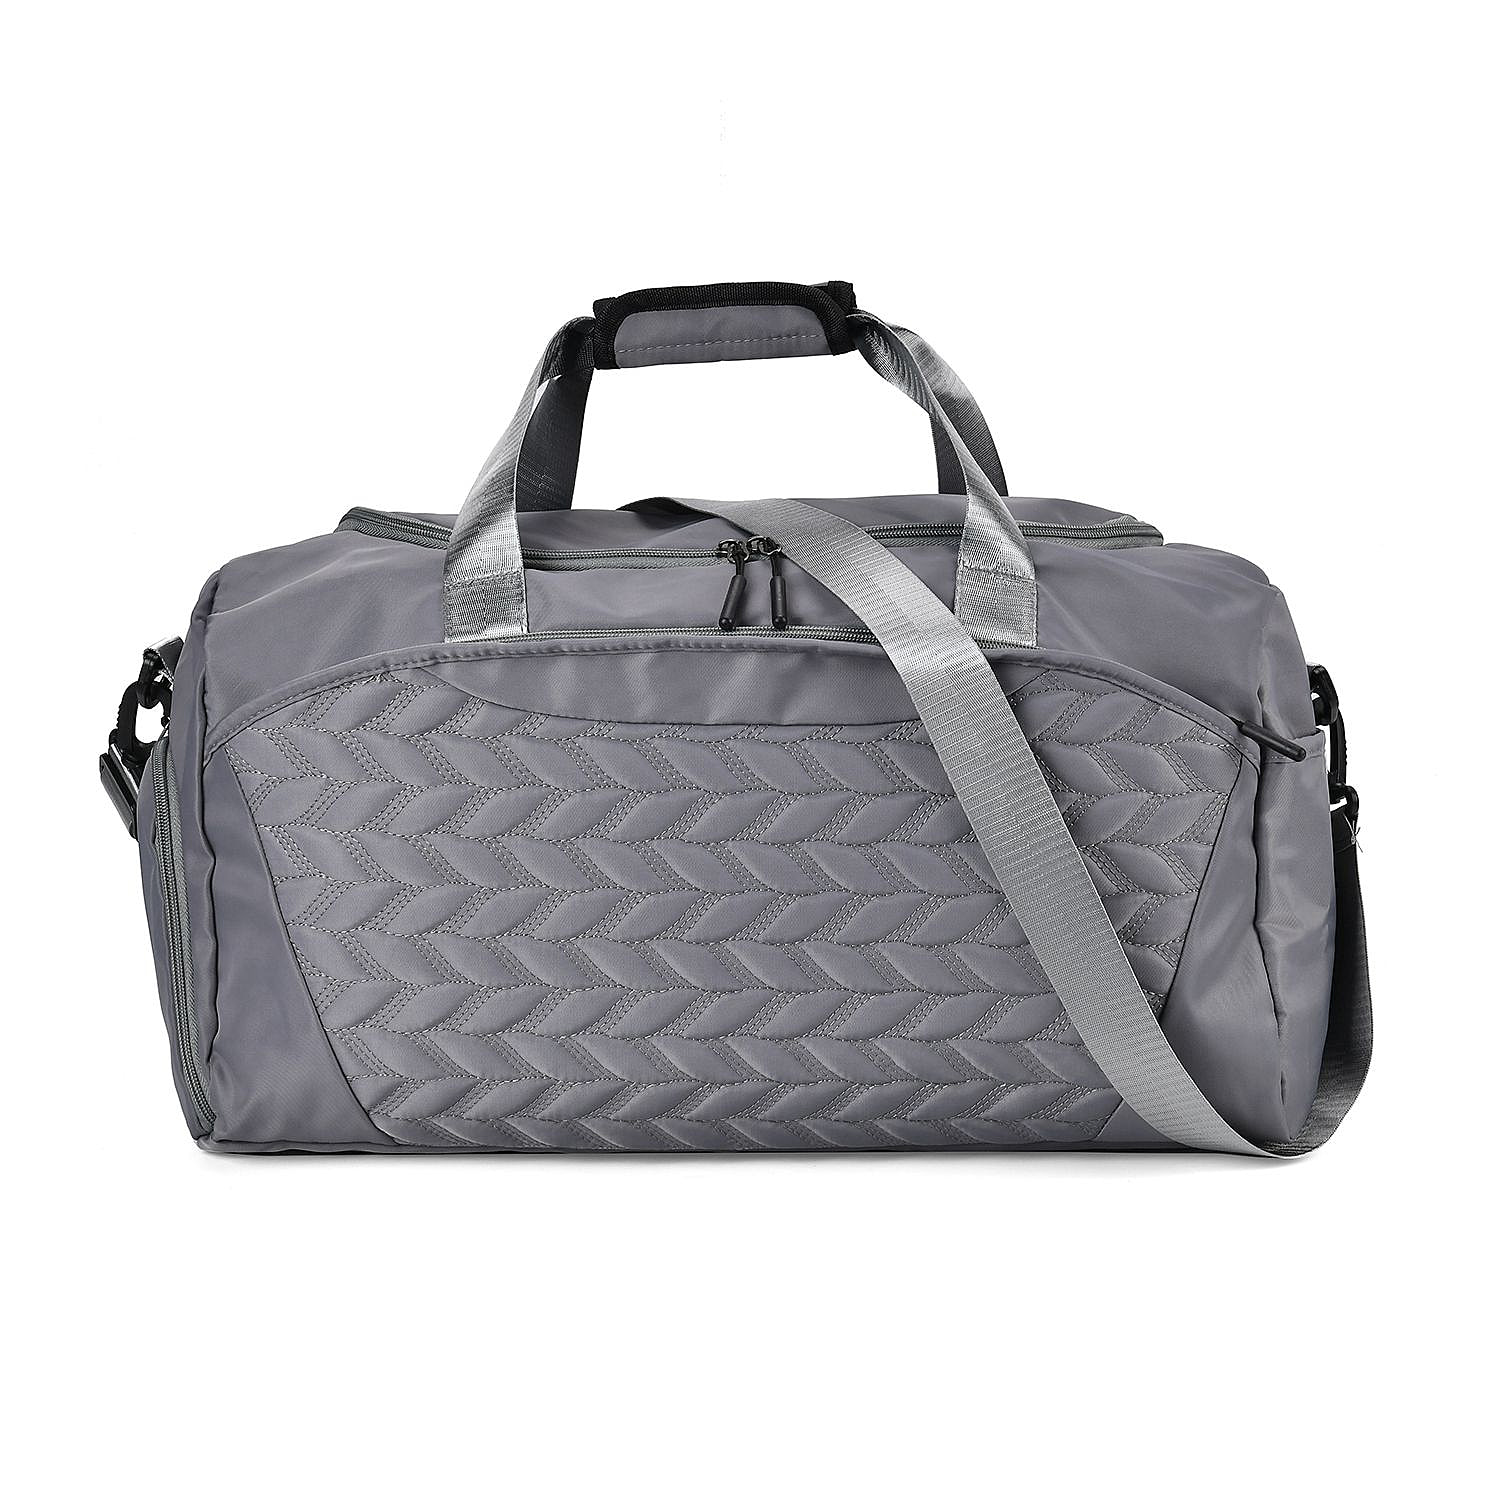 Travel-Duffle-Bag-with-Quilted-Leaves-Pattern-Dark-Grey